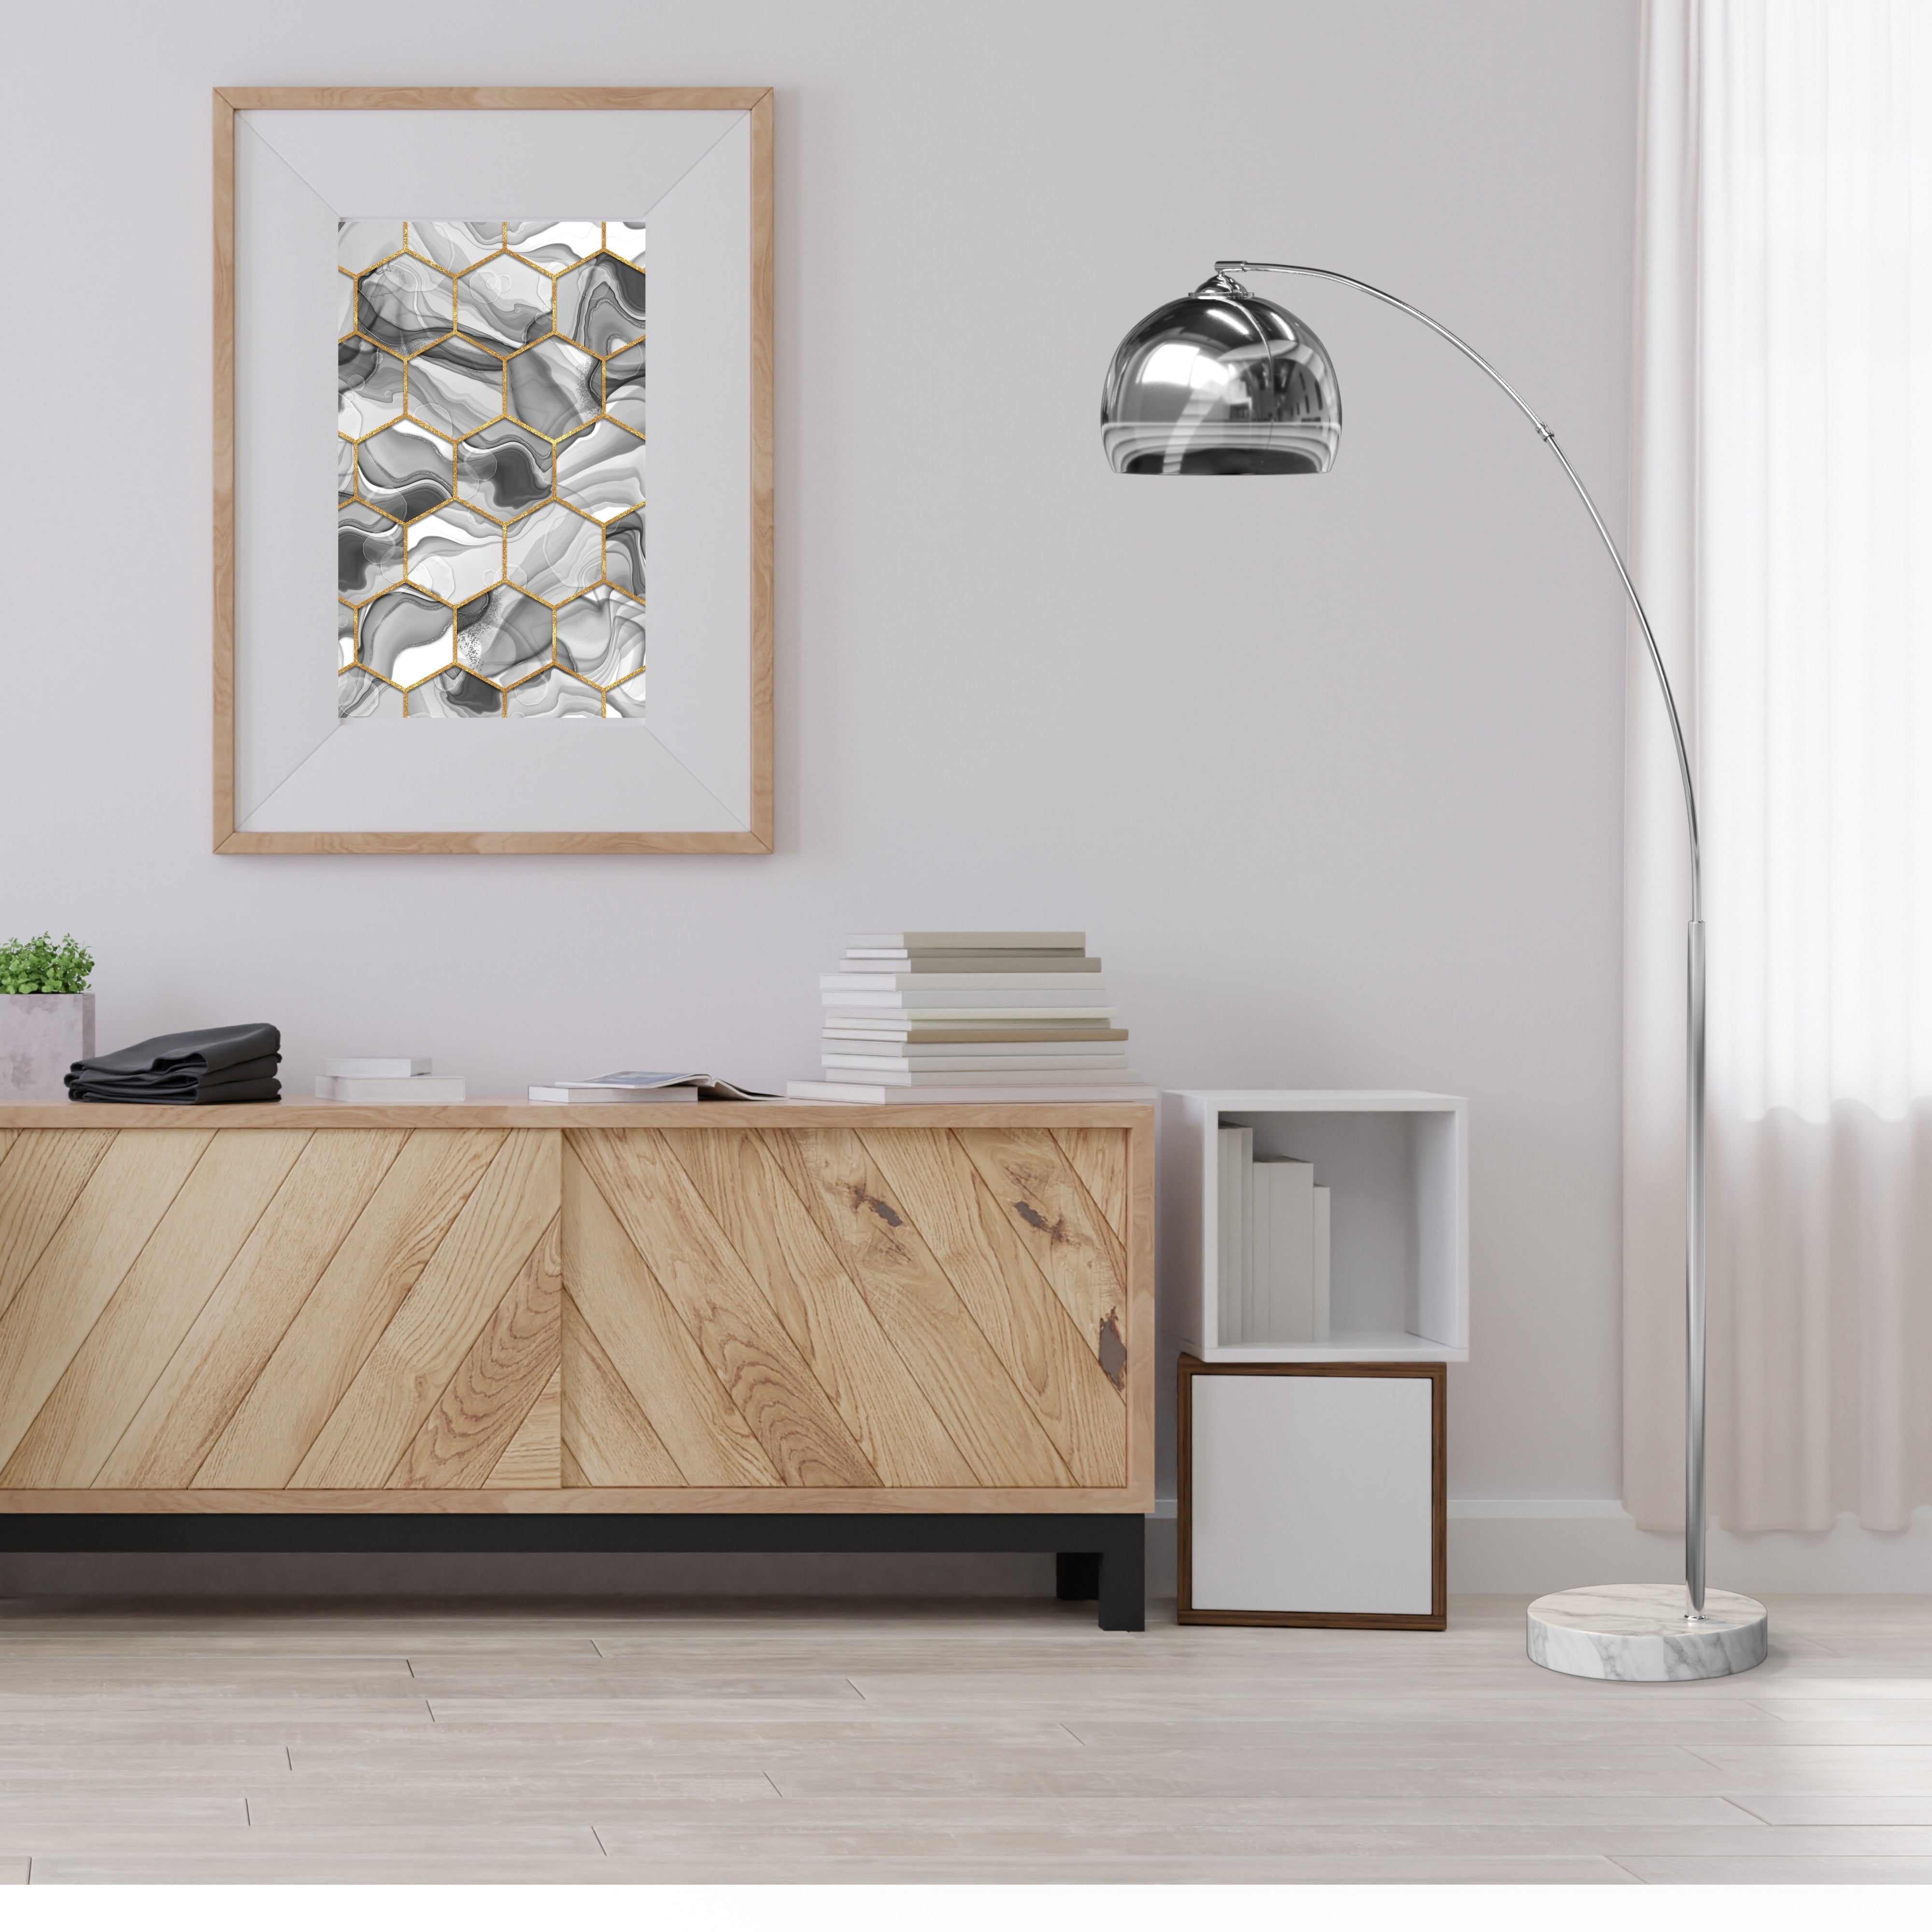 A modern living room with a white chair, wooden cabinet, and a silver arc floor lamp.